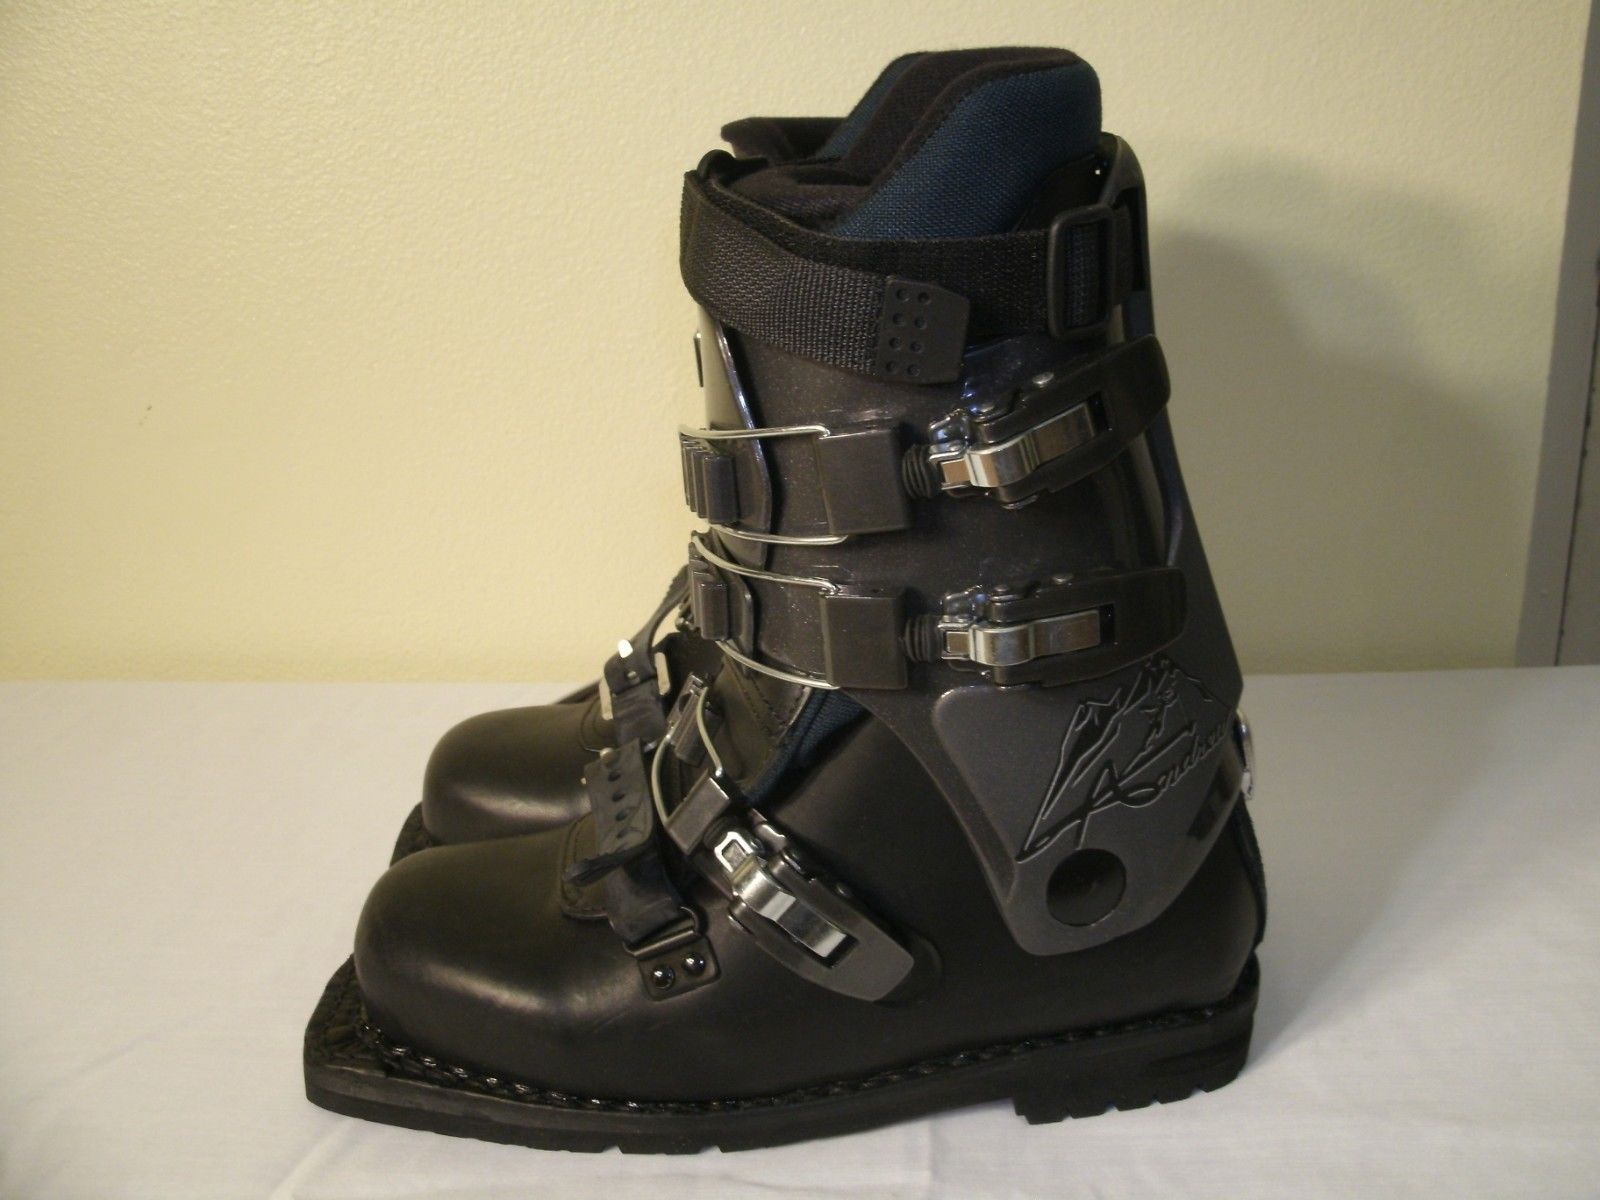 The Finest Leathers Nordic Norm 75mm Backcountry/Telemark Boots Page 11 Telemark Talk